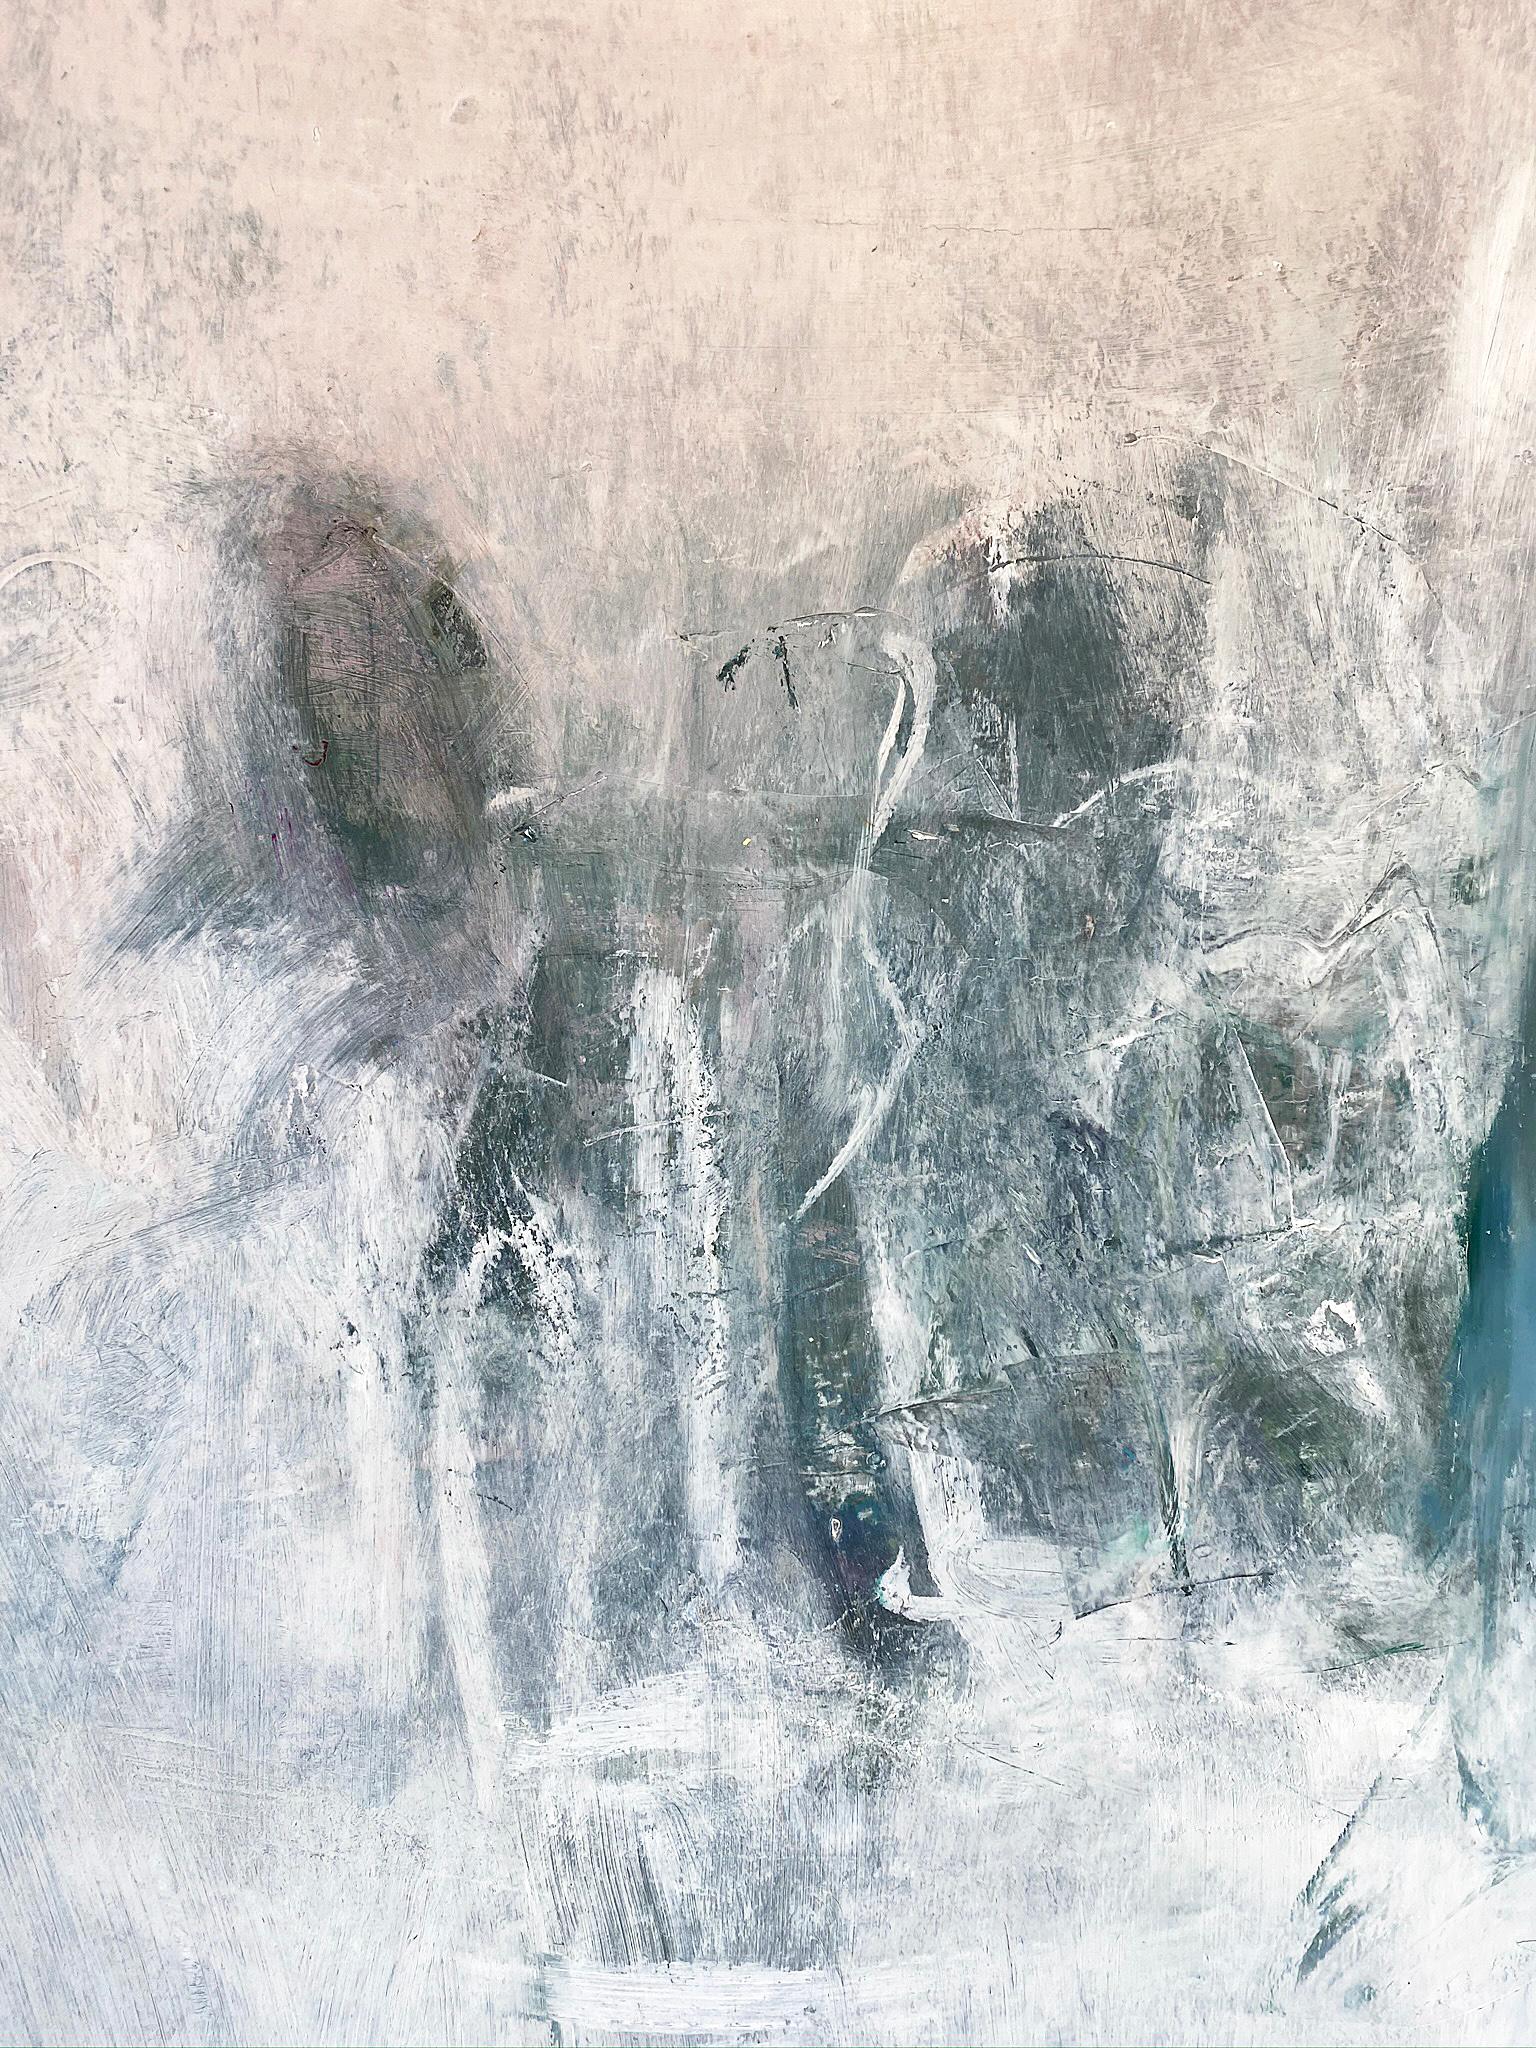 Oil & cold wax painting, Sandrine Kern, Winter White Out For Sale 1